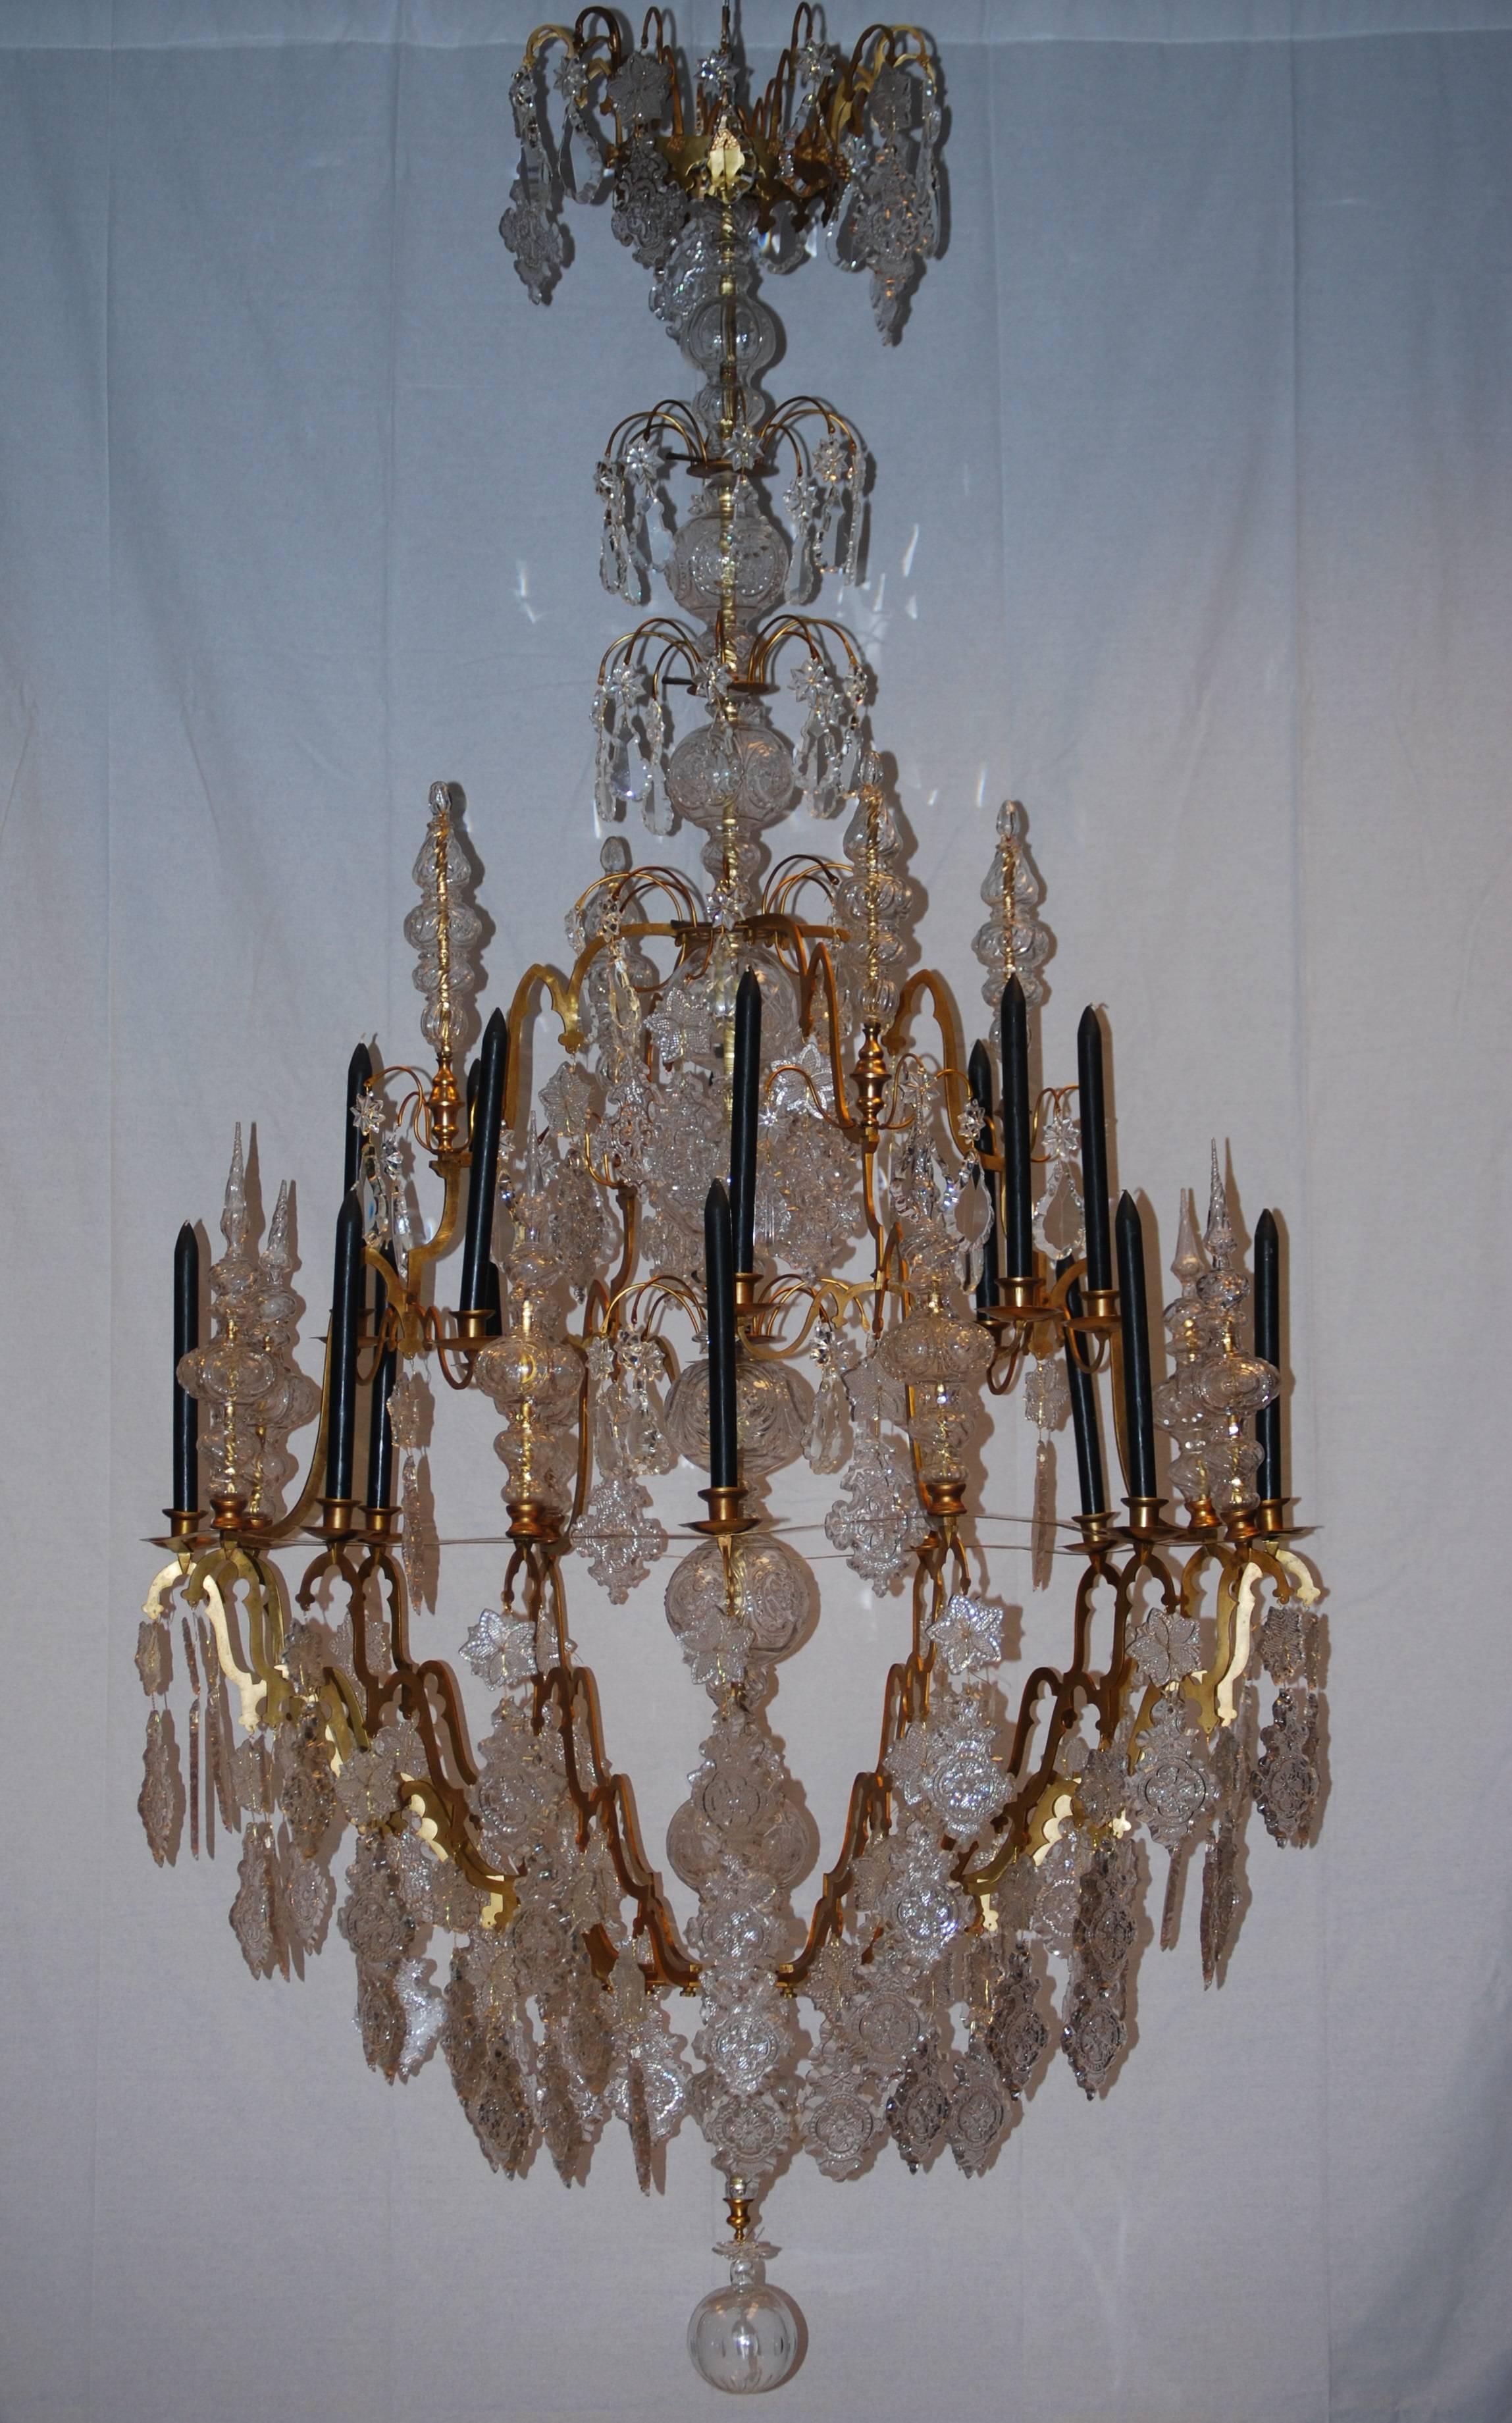 
An extremely large gilded and rock crystal cage chandelier having two rows of arms totaling 16 candles holders within its frame giving a total of 16 lights with finials on two levels of rock crystal finials from which sprays radiate and curve